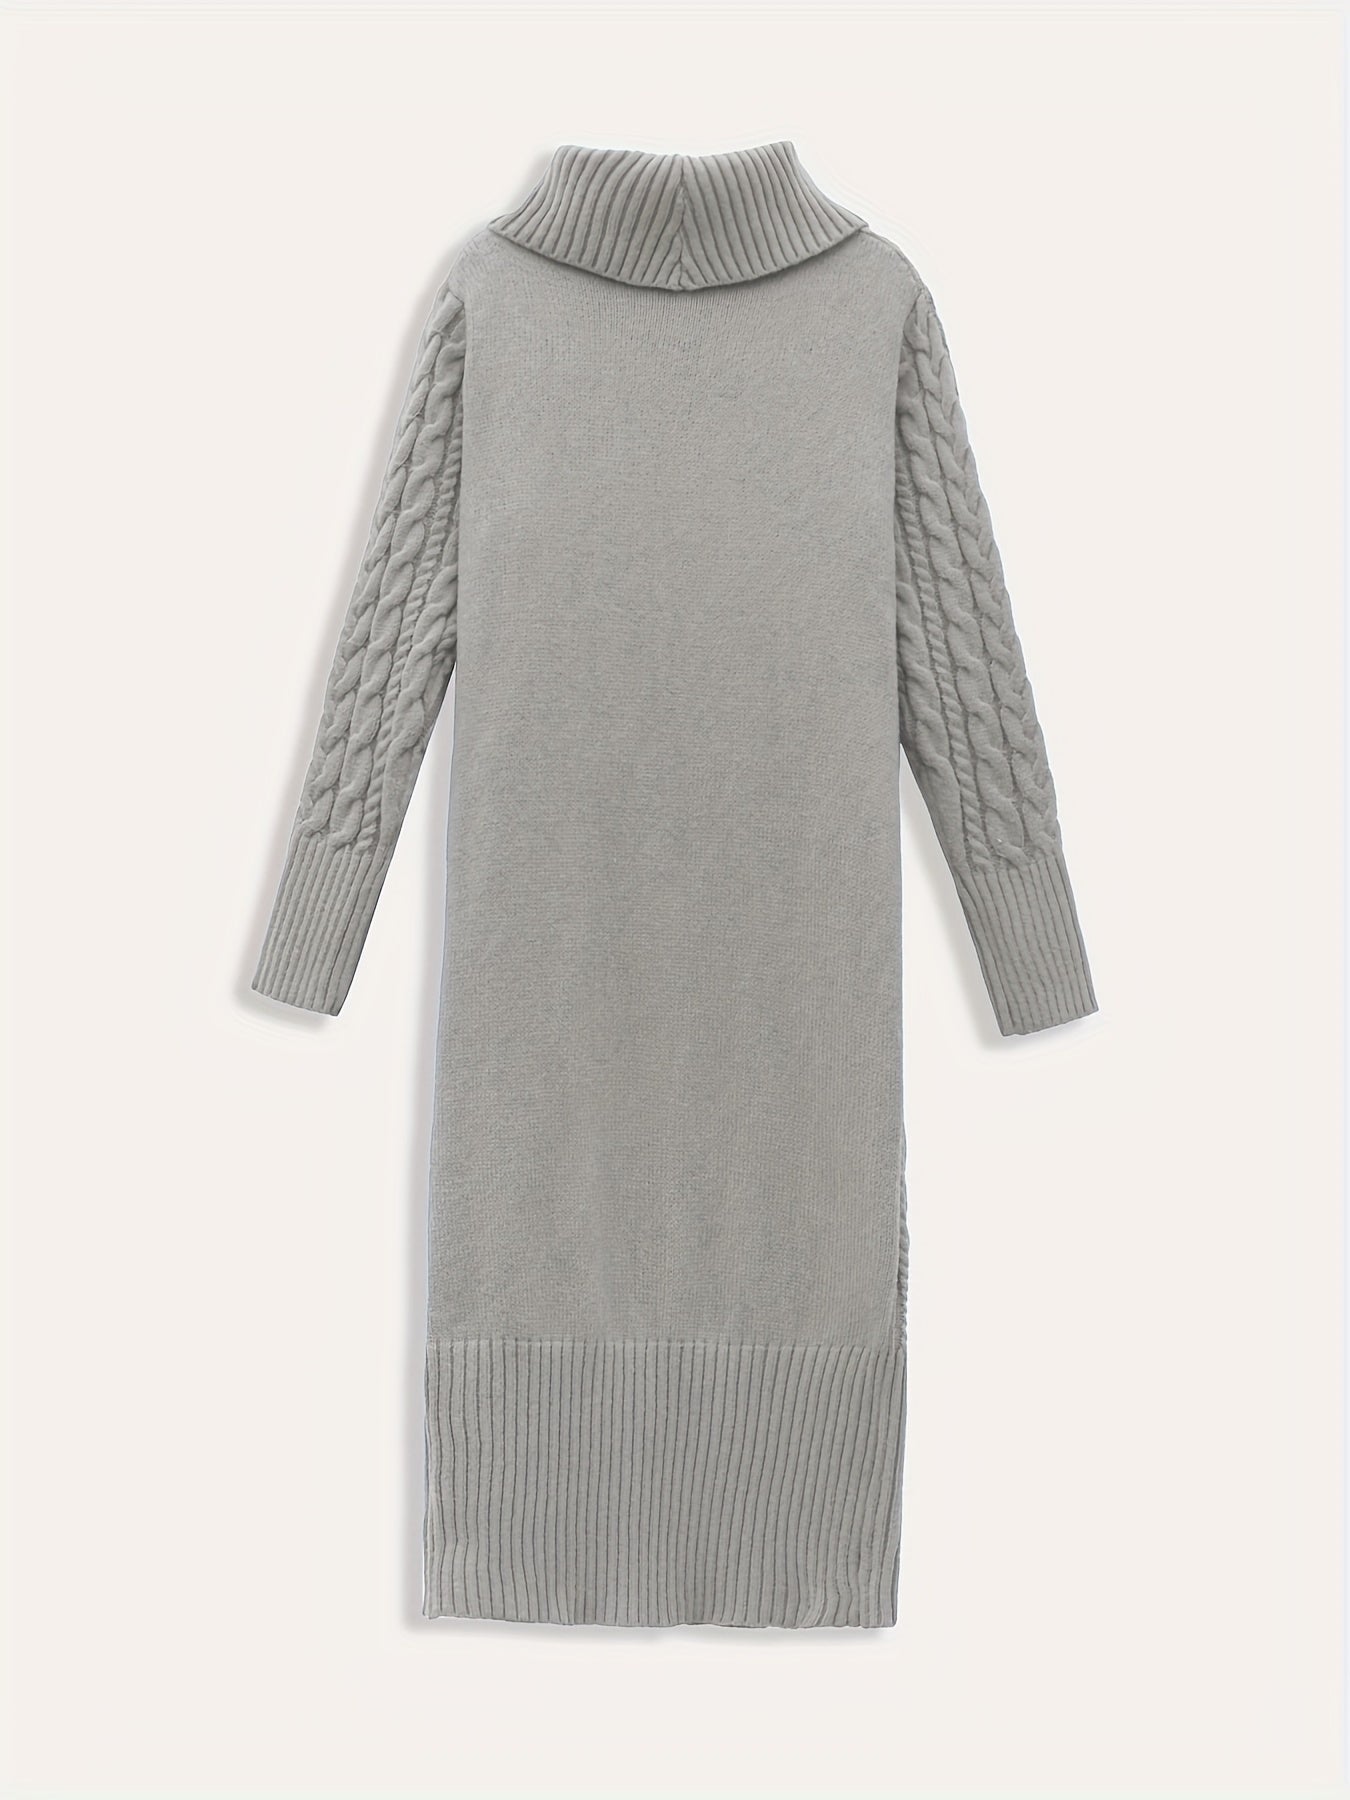 Antmvs Solid Cable Knit Sweater Dress, Casual Turtleneck Long Sleeve Pocket Front Dress, Women's Clothing